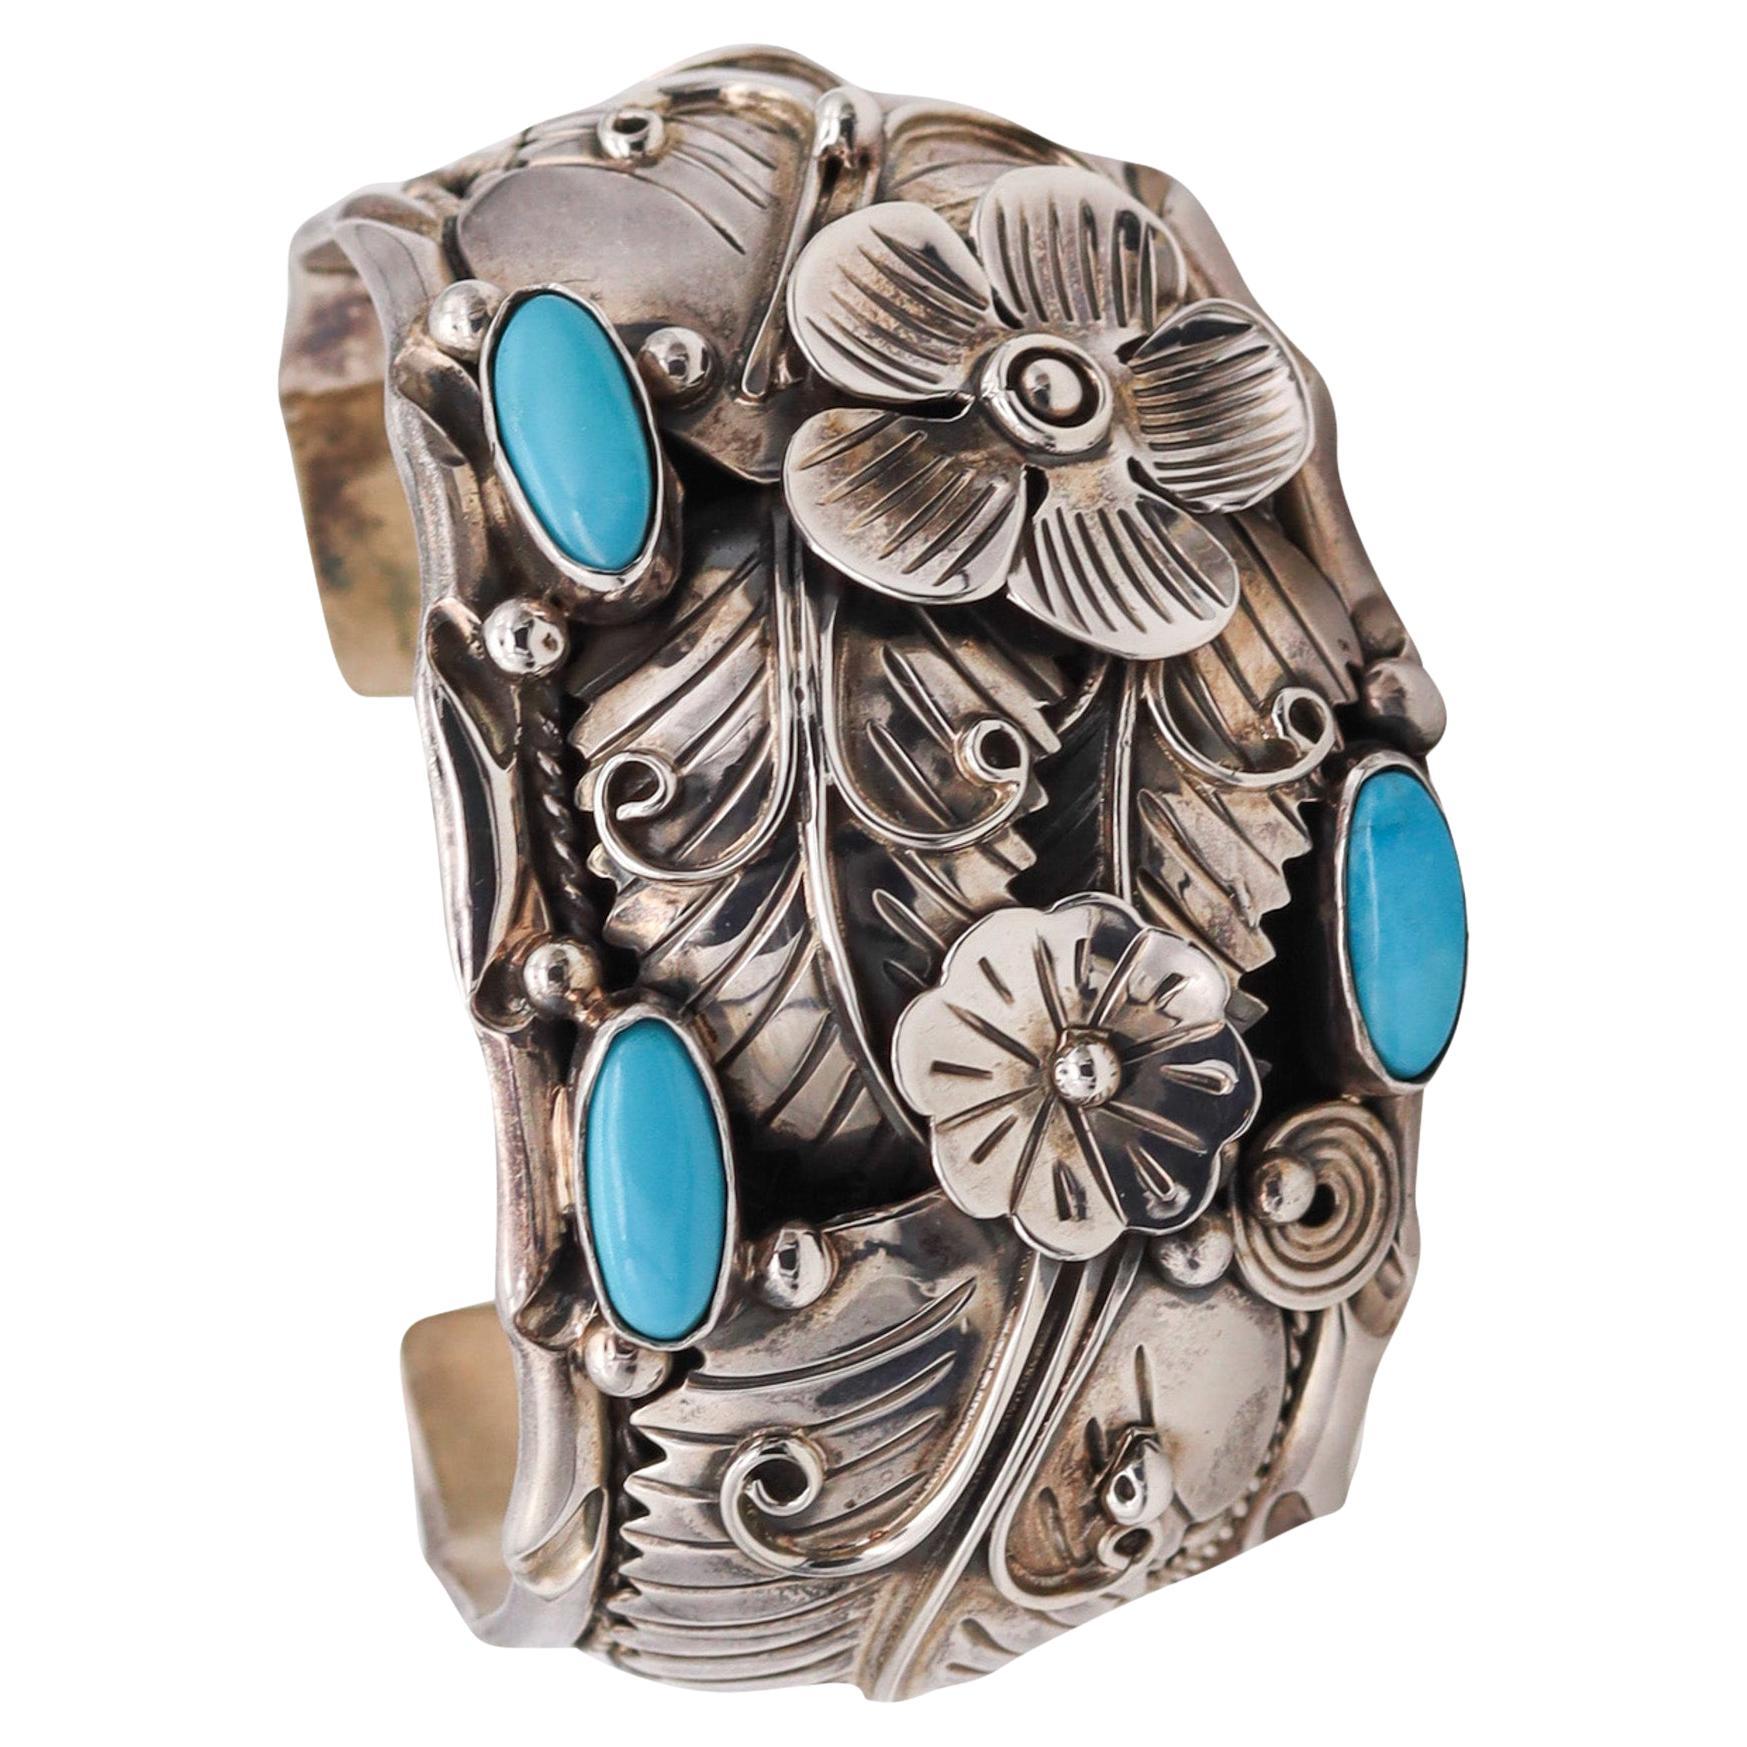 Mexico 1950 Taxco Statement Cuff Bracelet In 925 Sterling Silver With Turquoises